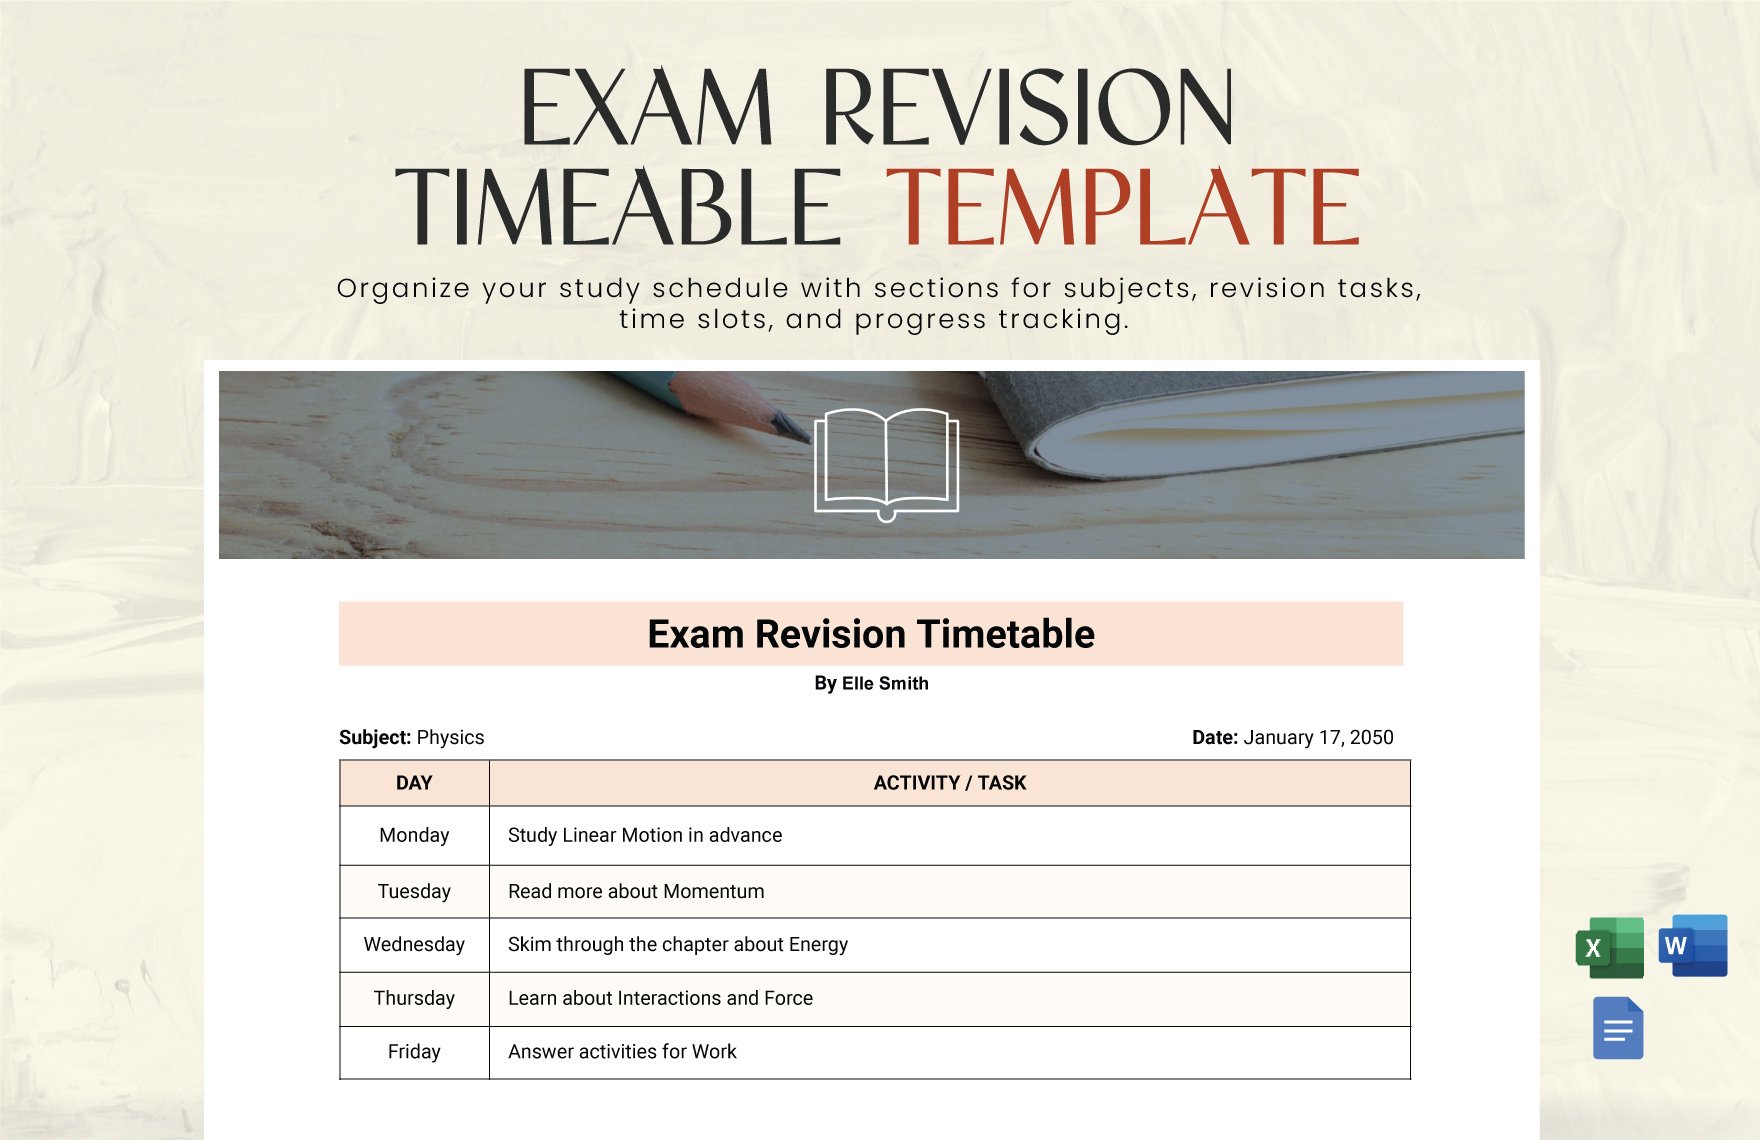 Exam Revision Timetable Template in Word, Google Docs, Excel